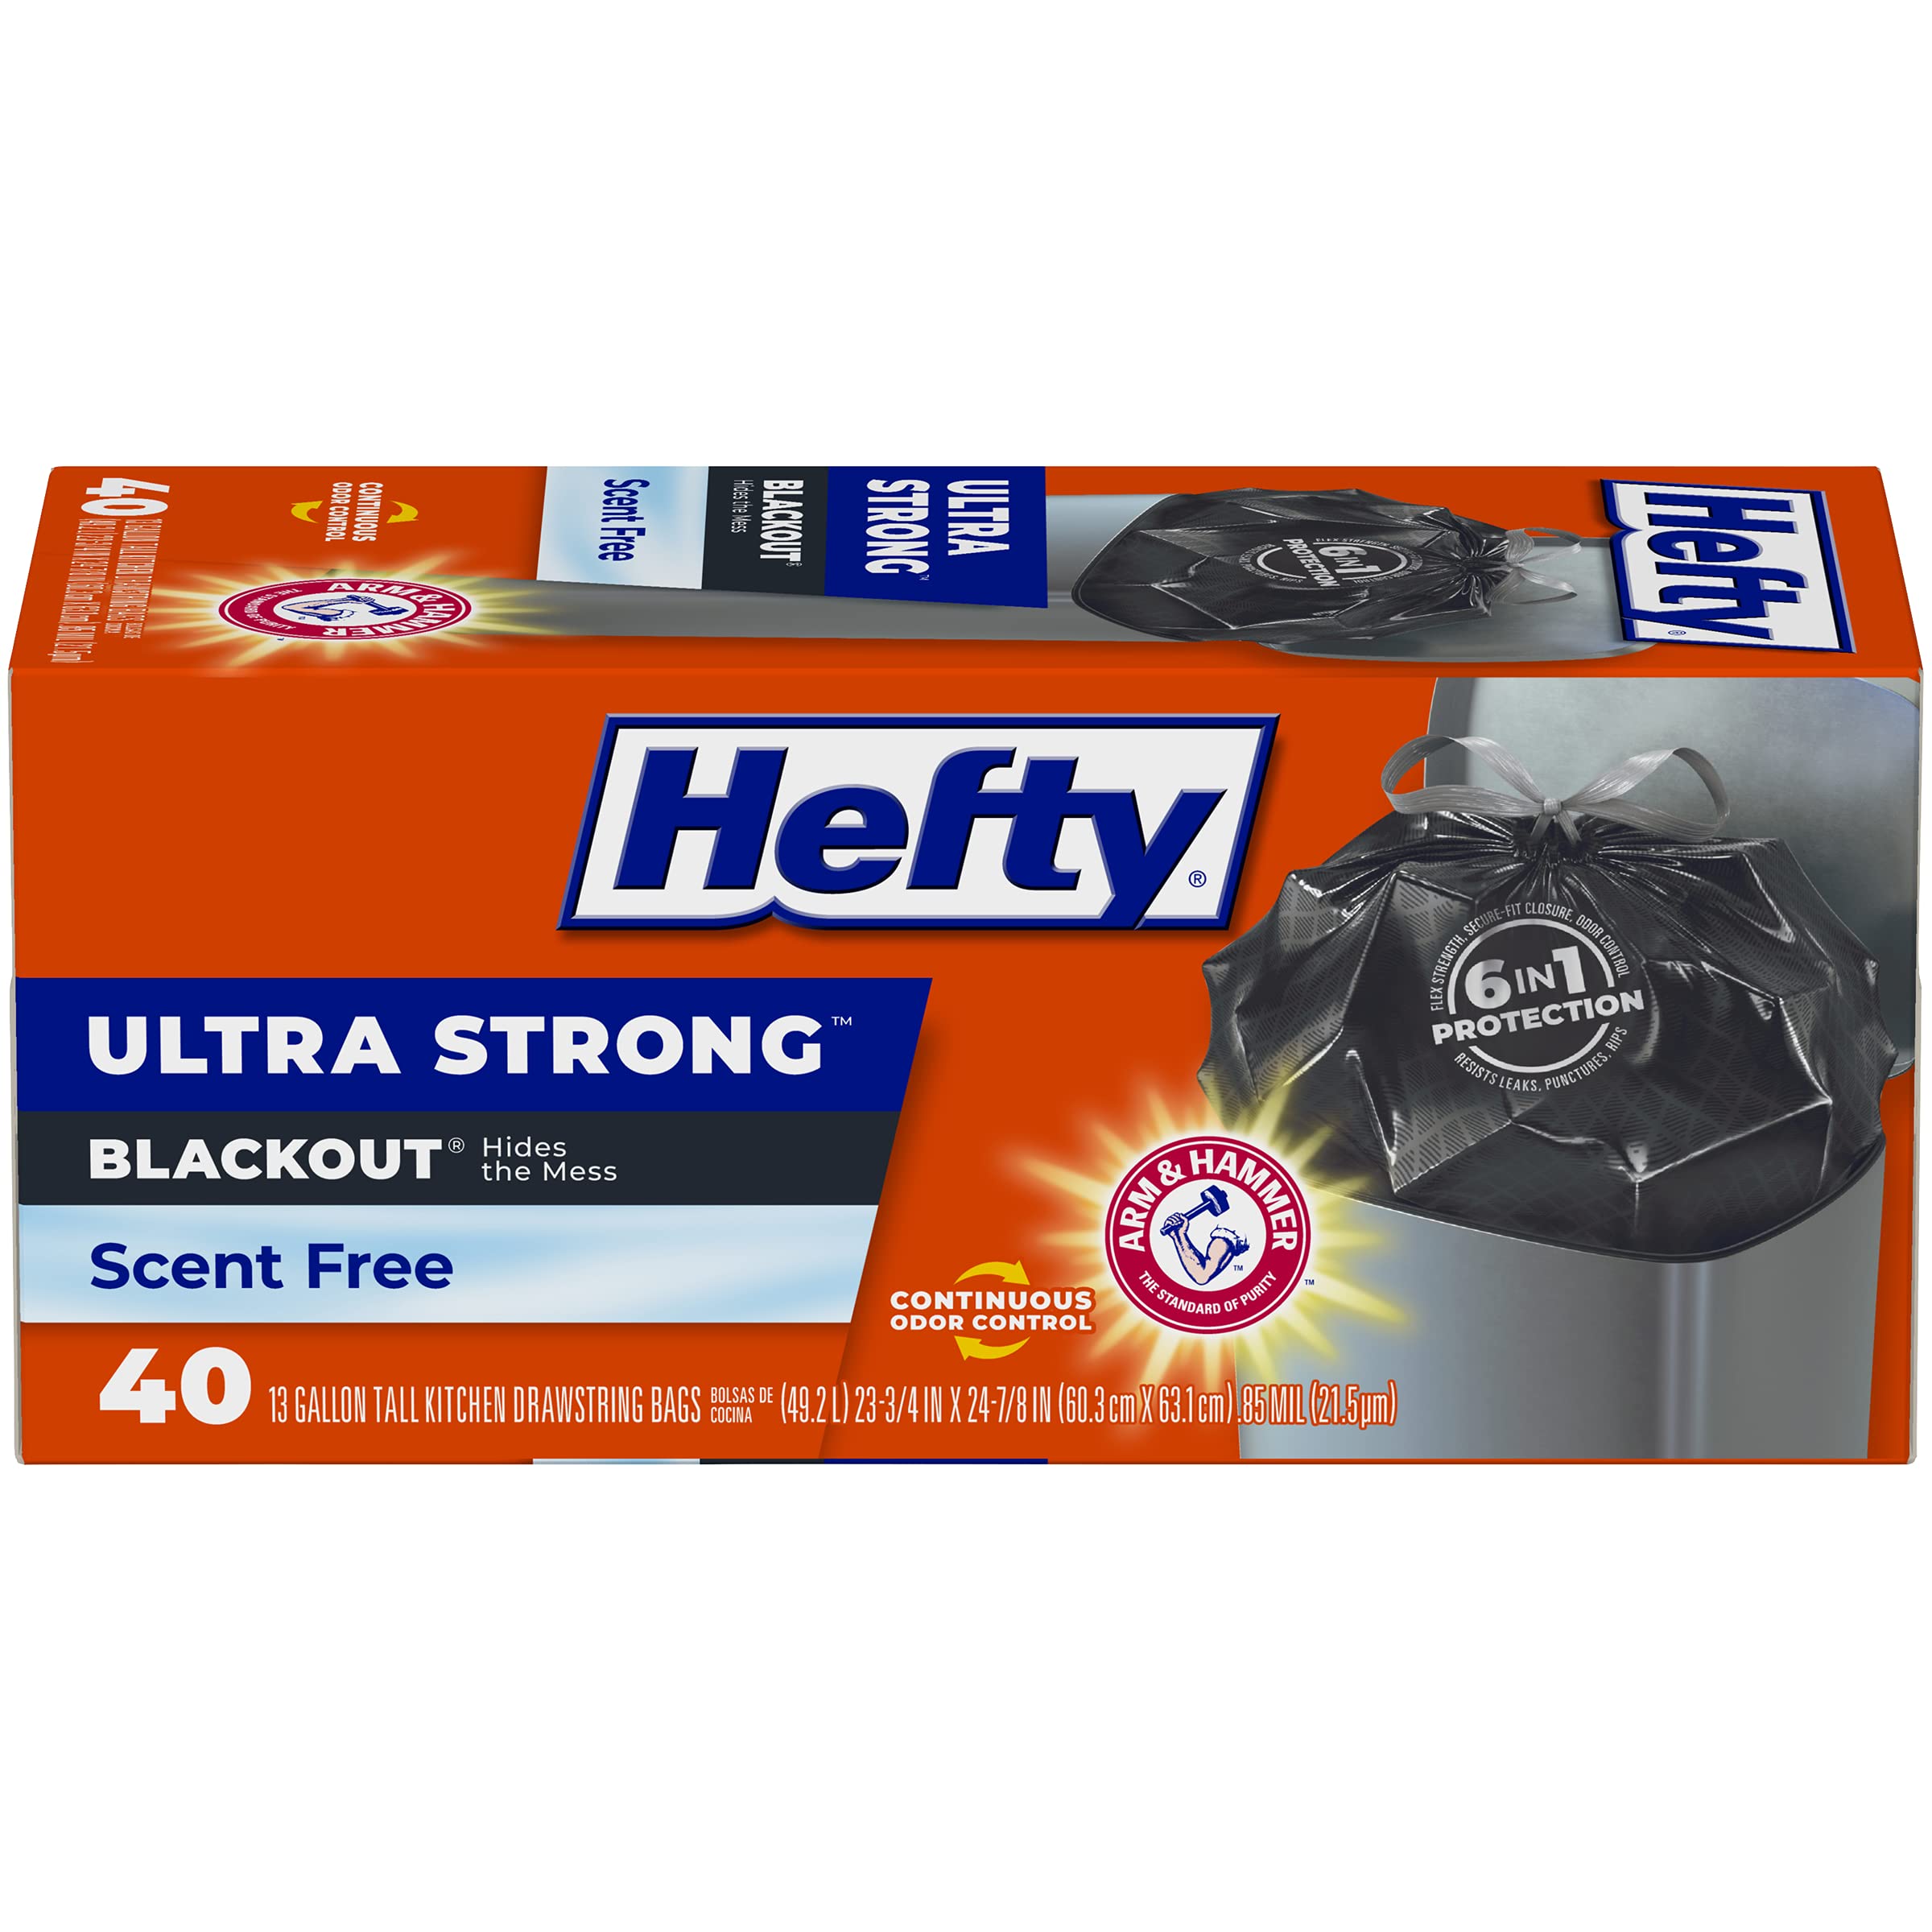 $6.49 /w S&S: Hefty Ultra Strong Tall Kitchen Trash Bags, Blackout, Unscented, 13 Gallon, 40 Count